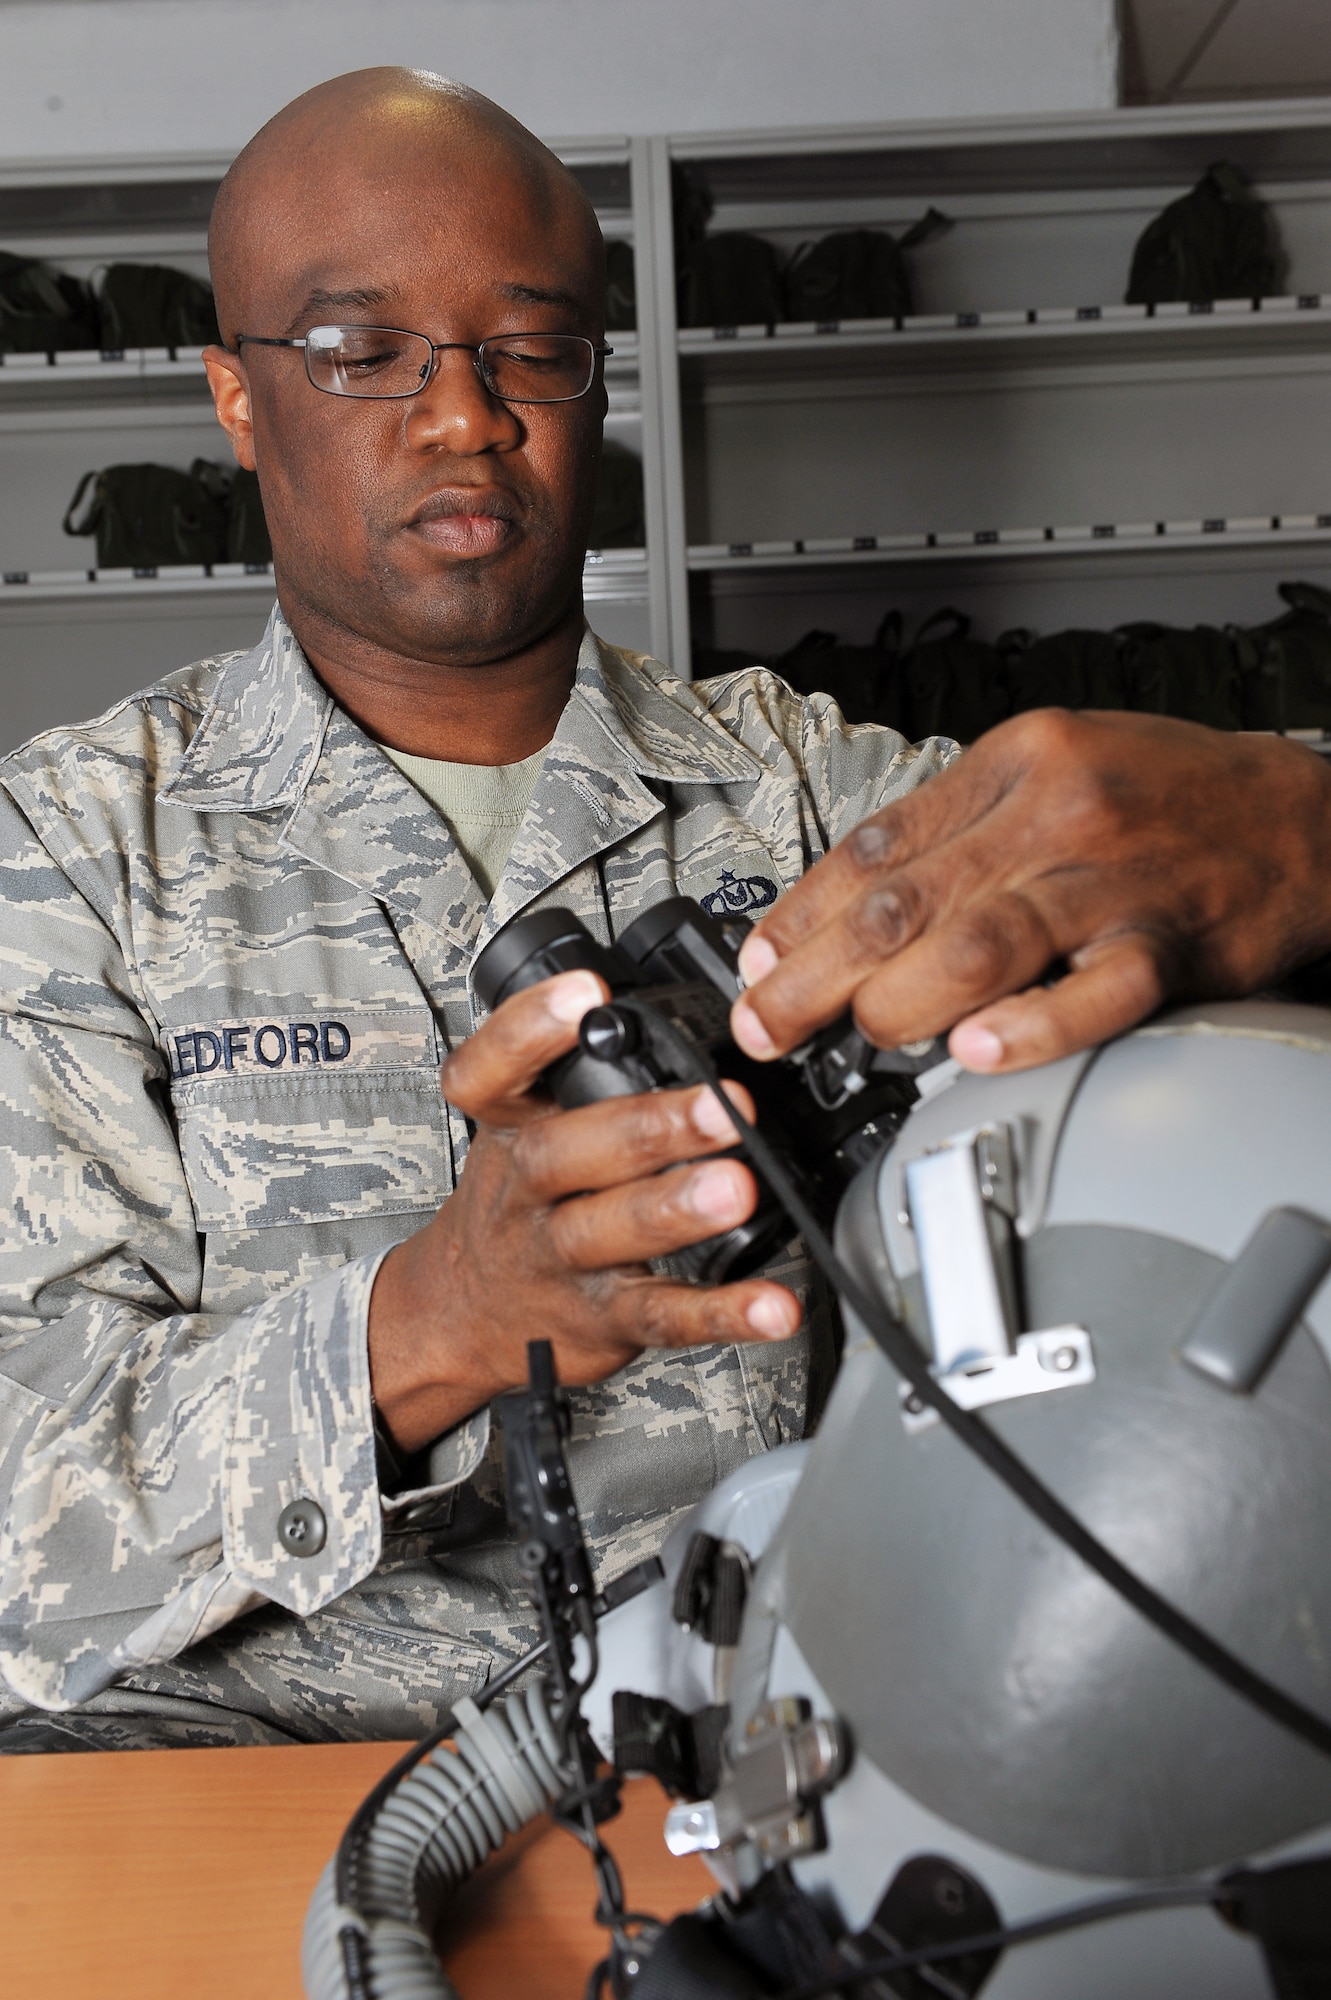 Tech. Sgt. Timothy Ledford, 86th Operations Support Squadron aircrew flight equipment craftsman, attaches night-vision goggles to a helmet, March 20, 2013, Ramstein Air Base, Germany. Ledford was honored with the aircrew flight equipment NCO of the year award for his outstanding accomplishments. (U.S. Air Force photo/Airman 1st Class Dymekre Allen)